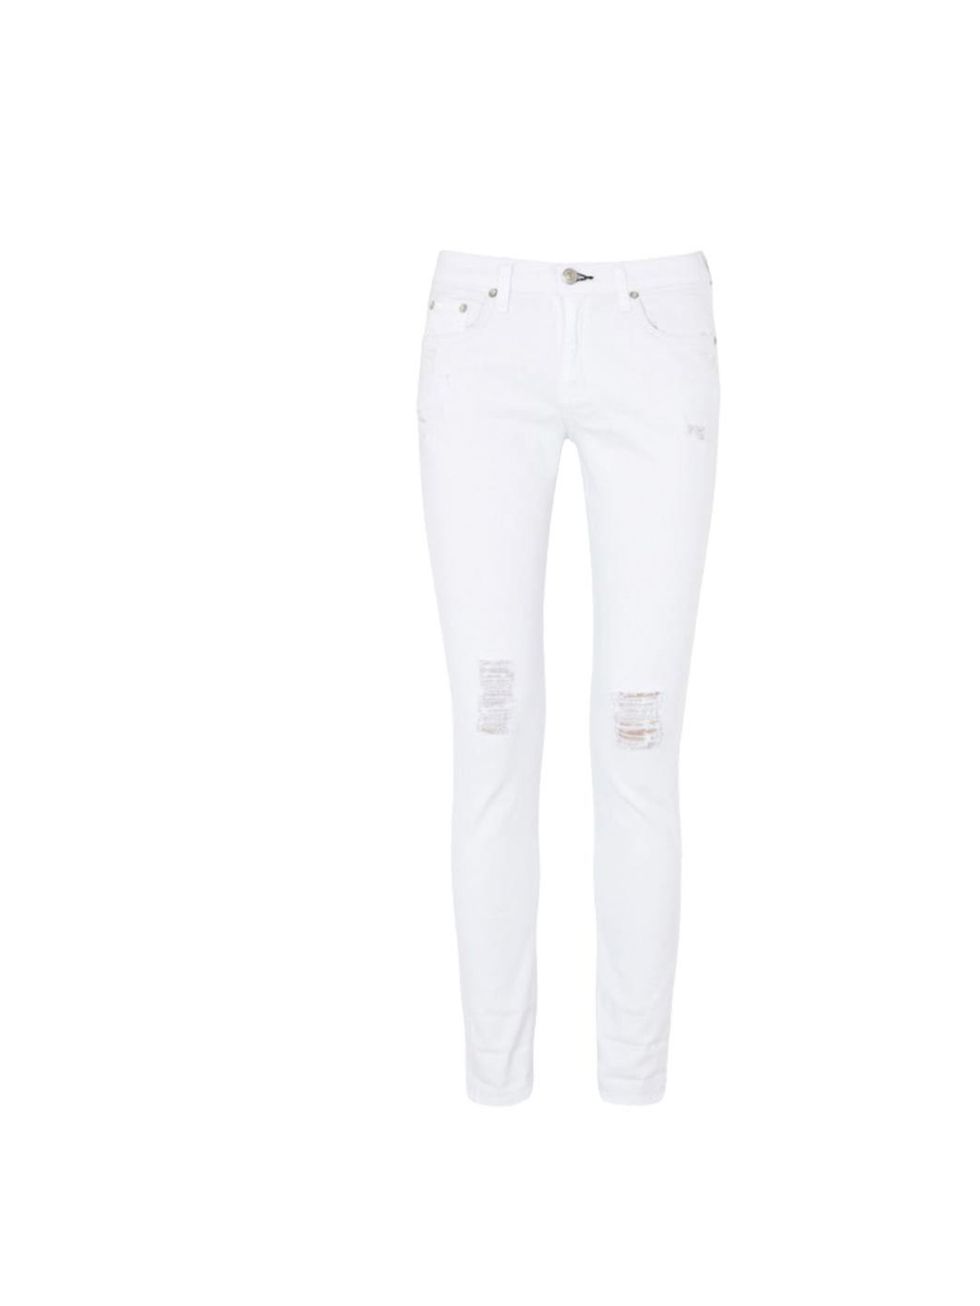 <p>Take a walk on the white side with Rag &amp; Bone's distressed skinny jeans, £175, at <a href="http://www.harveynichols.com/womens/categories-1/jeans/skinny/s447760-the-dash-mid-rise-skinny-jeans.html?colour=WHITE">Harvey Nichols</a></p>